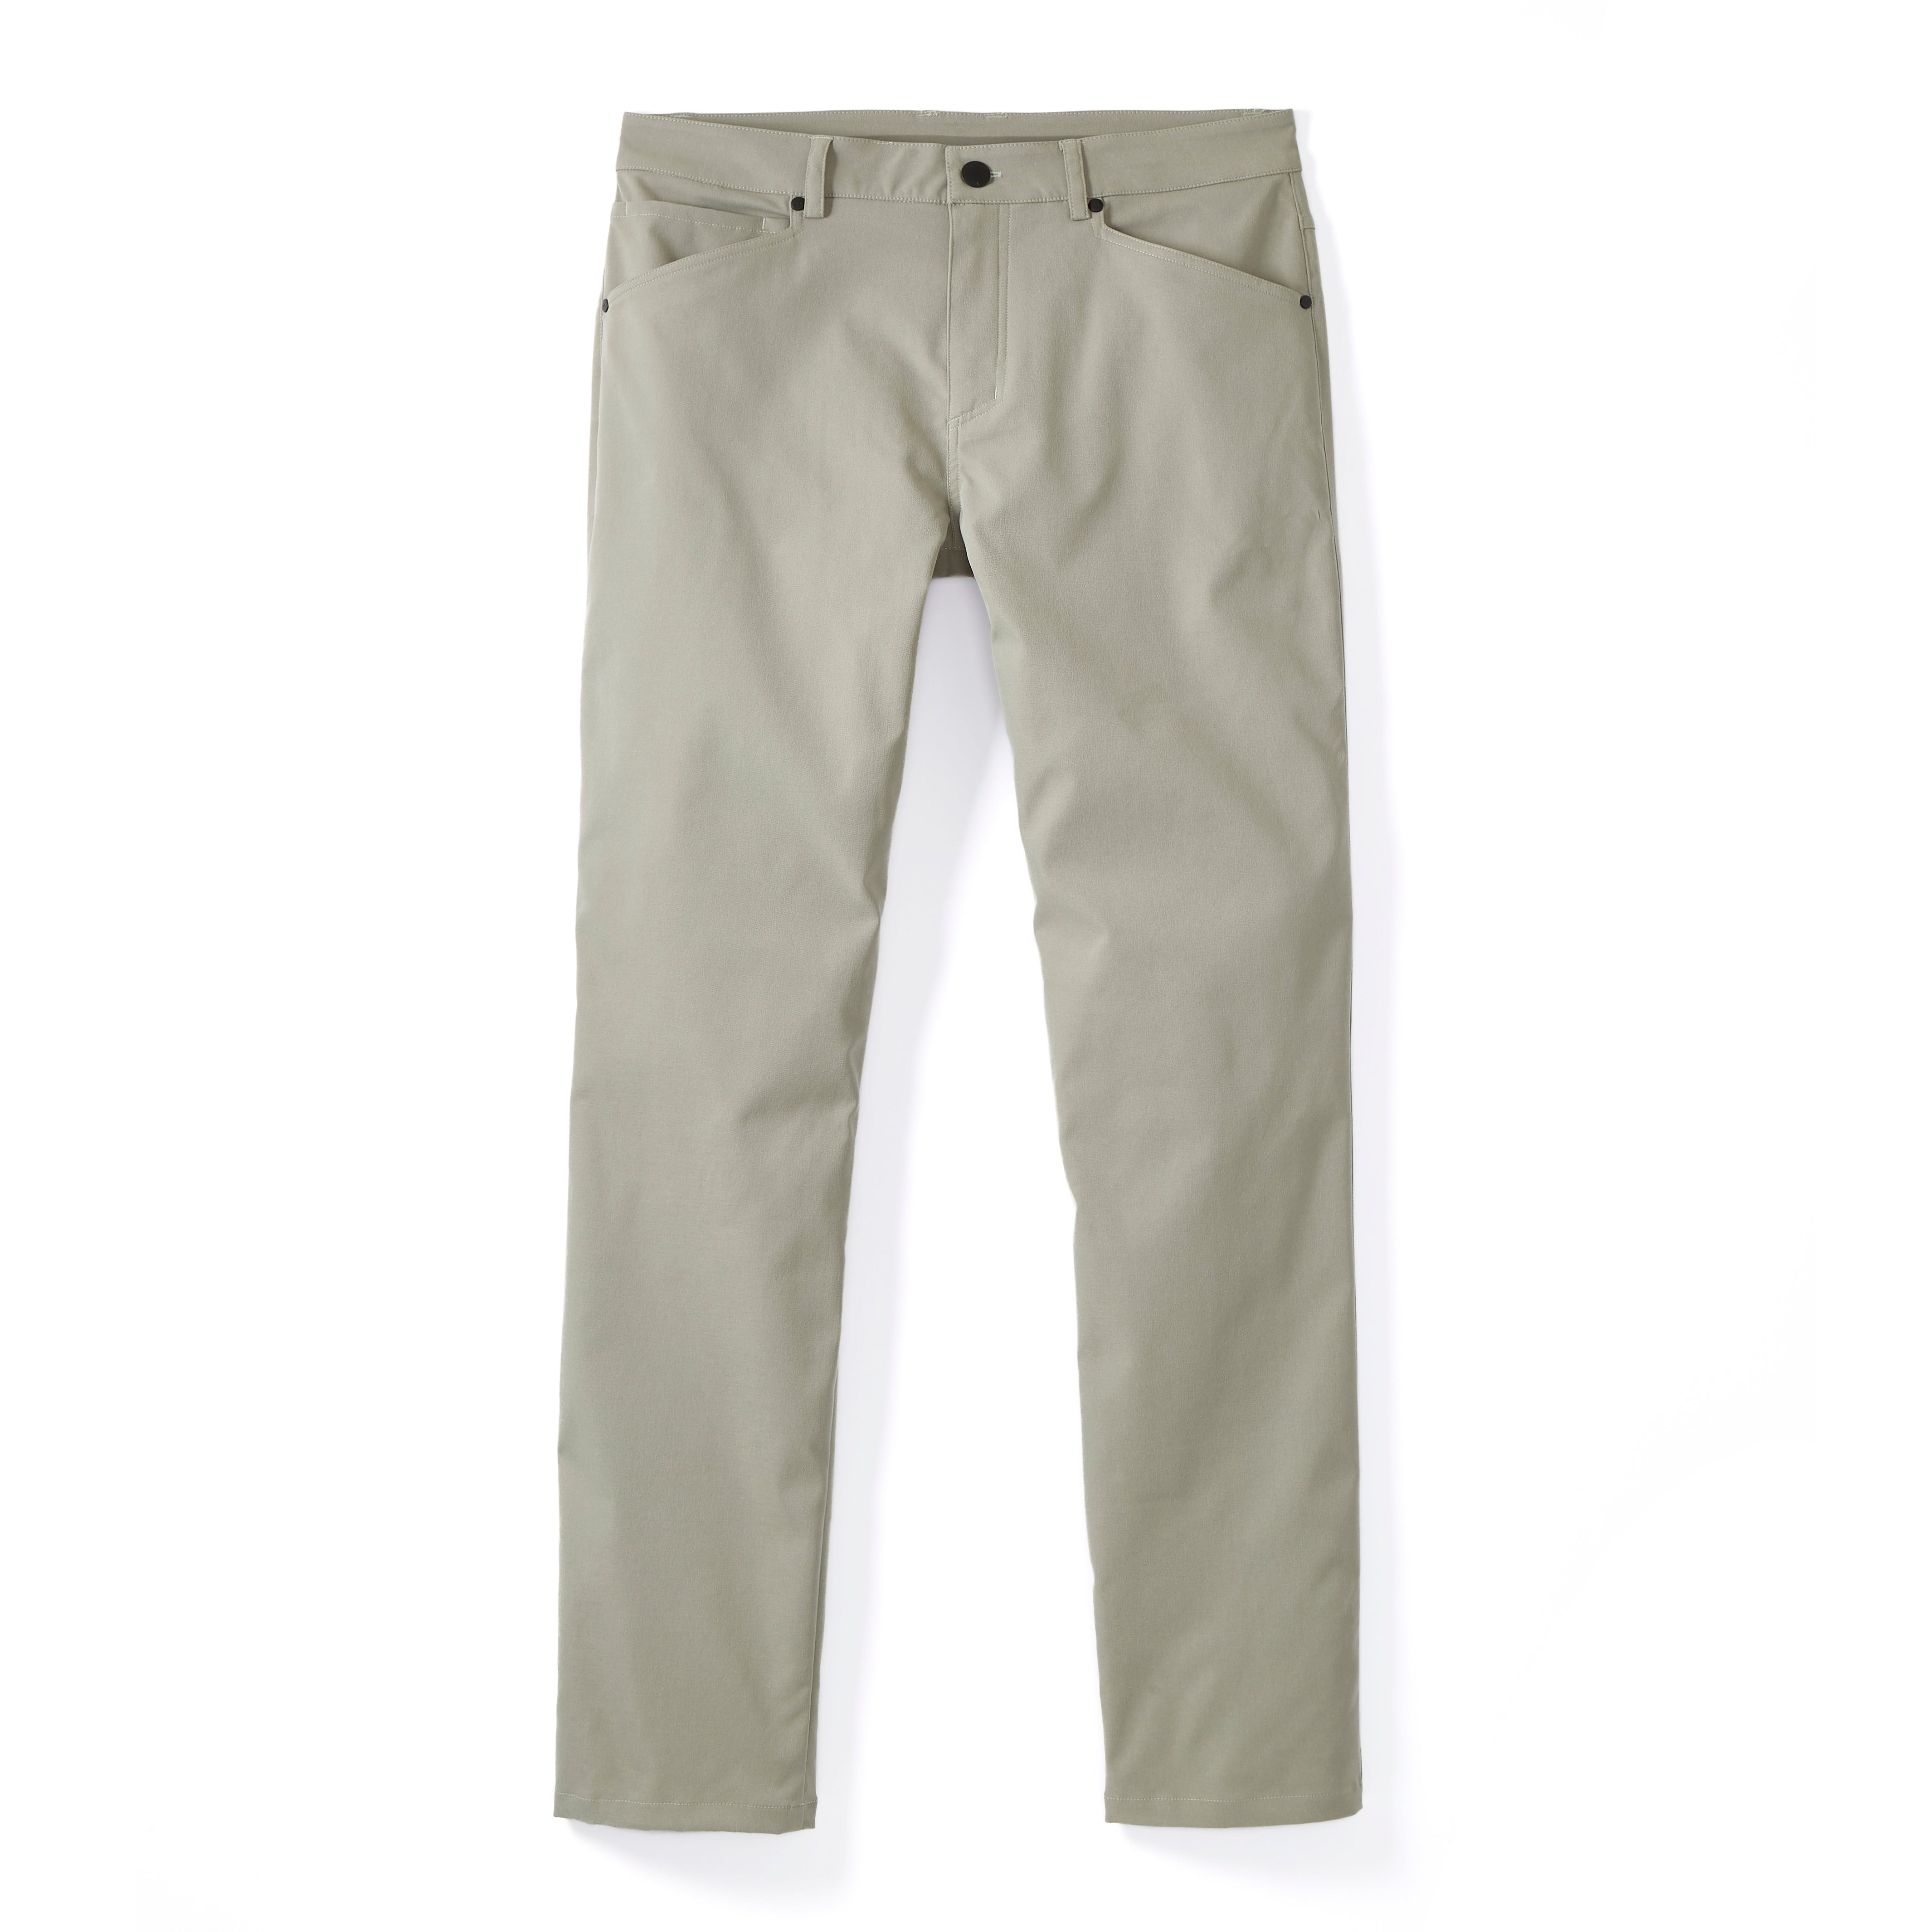 Everyday Pant in Dusty Olive